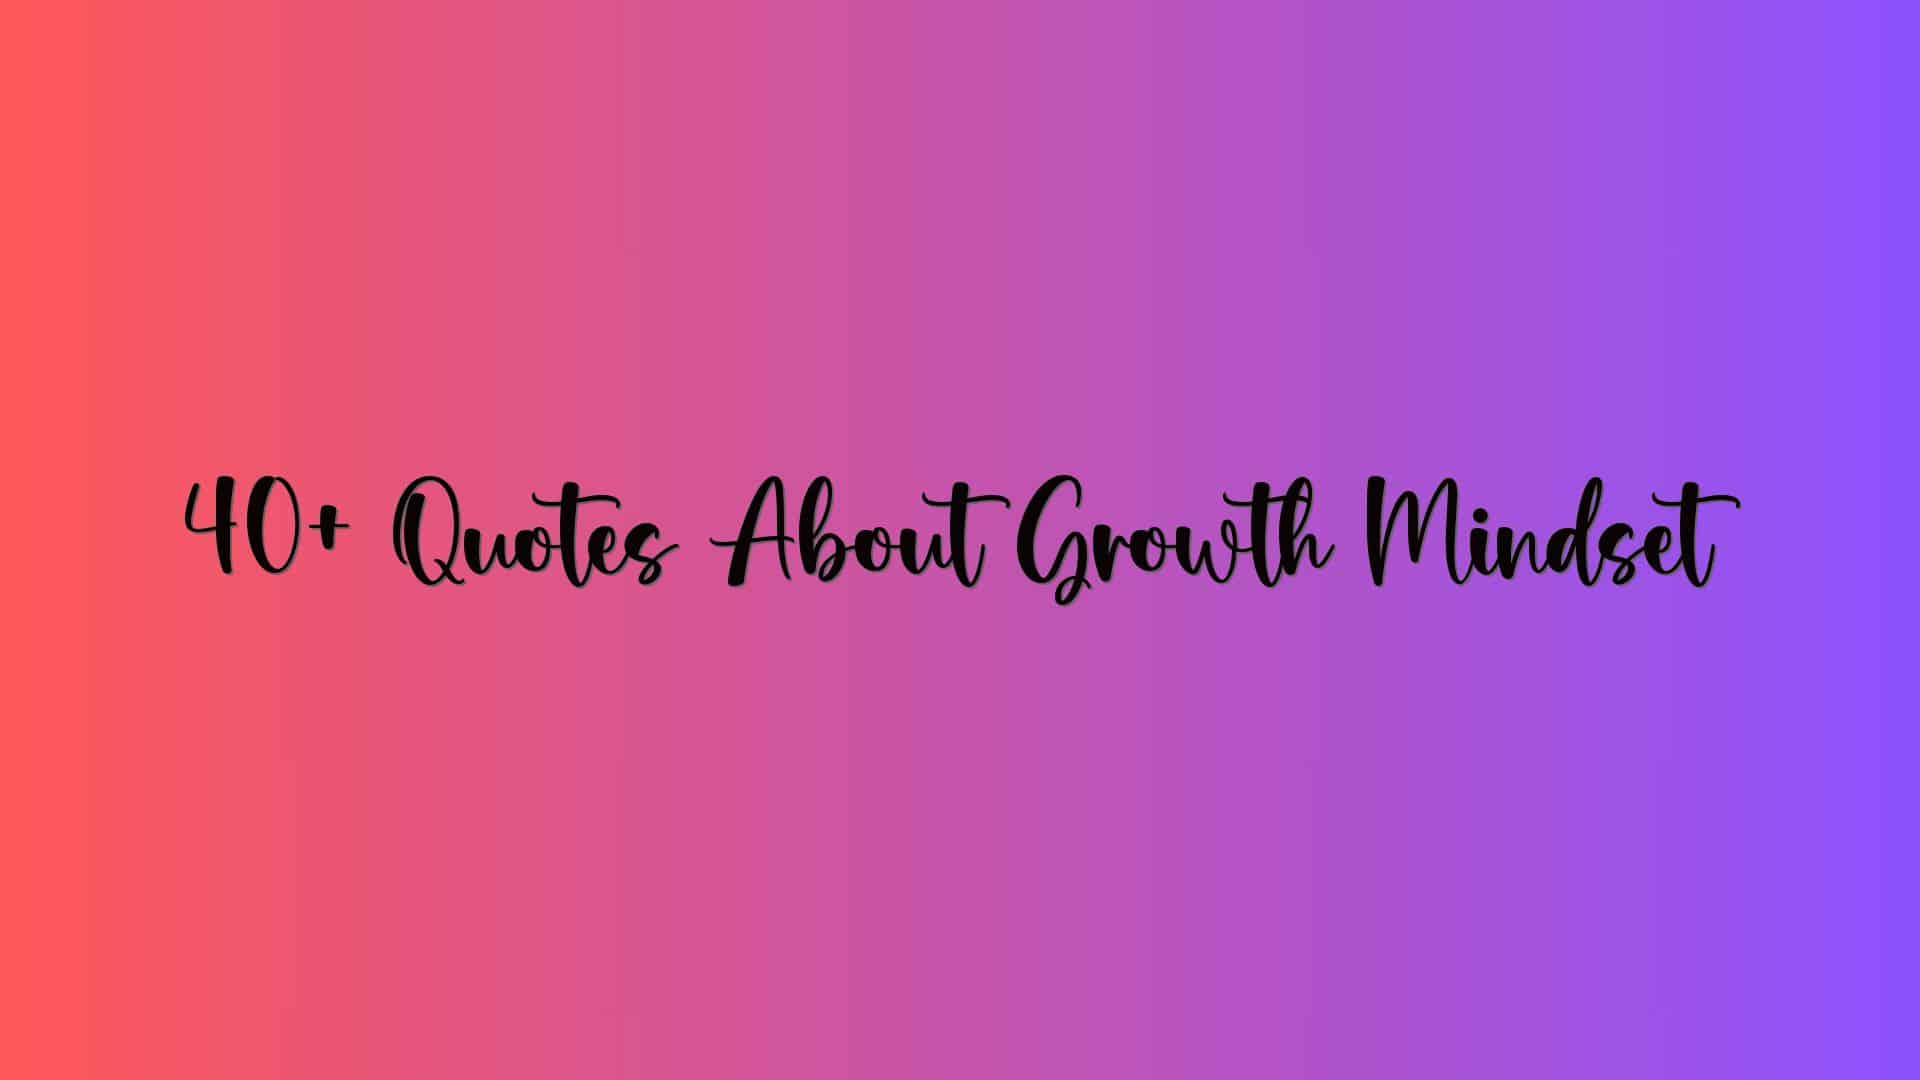 40+ Quotes About Growth Mindset